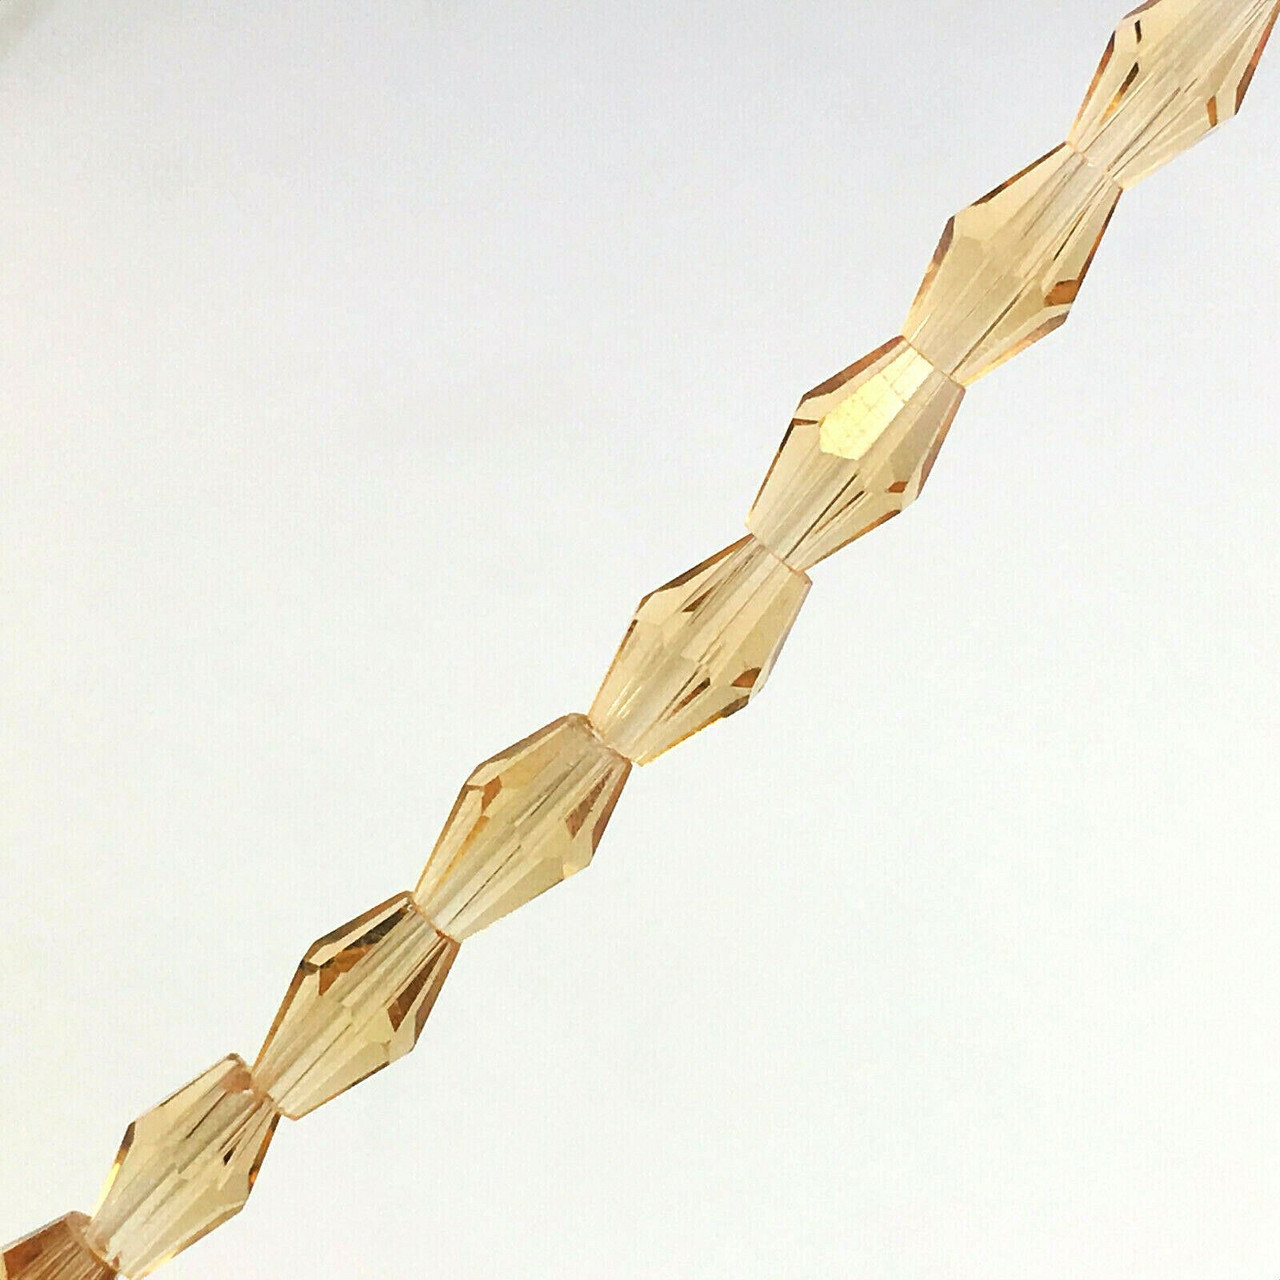 4x6mm Glass Crystal Elongated Bicone beads - PALE GOLD - approx 16-18" strand (70 beads)